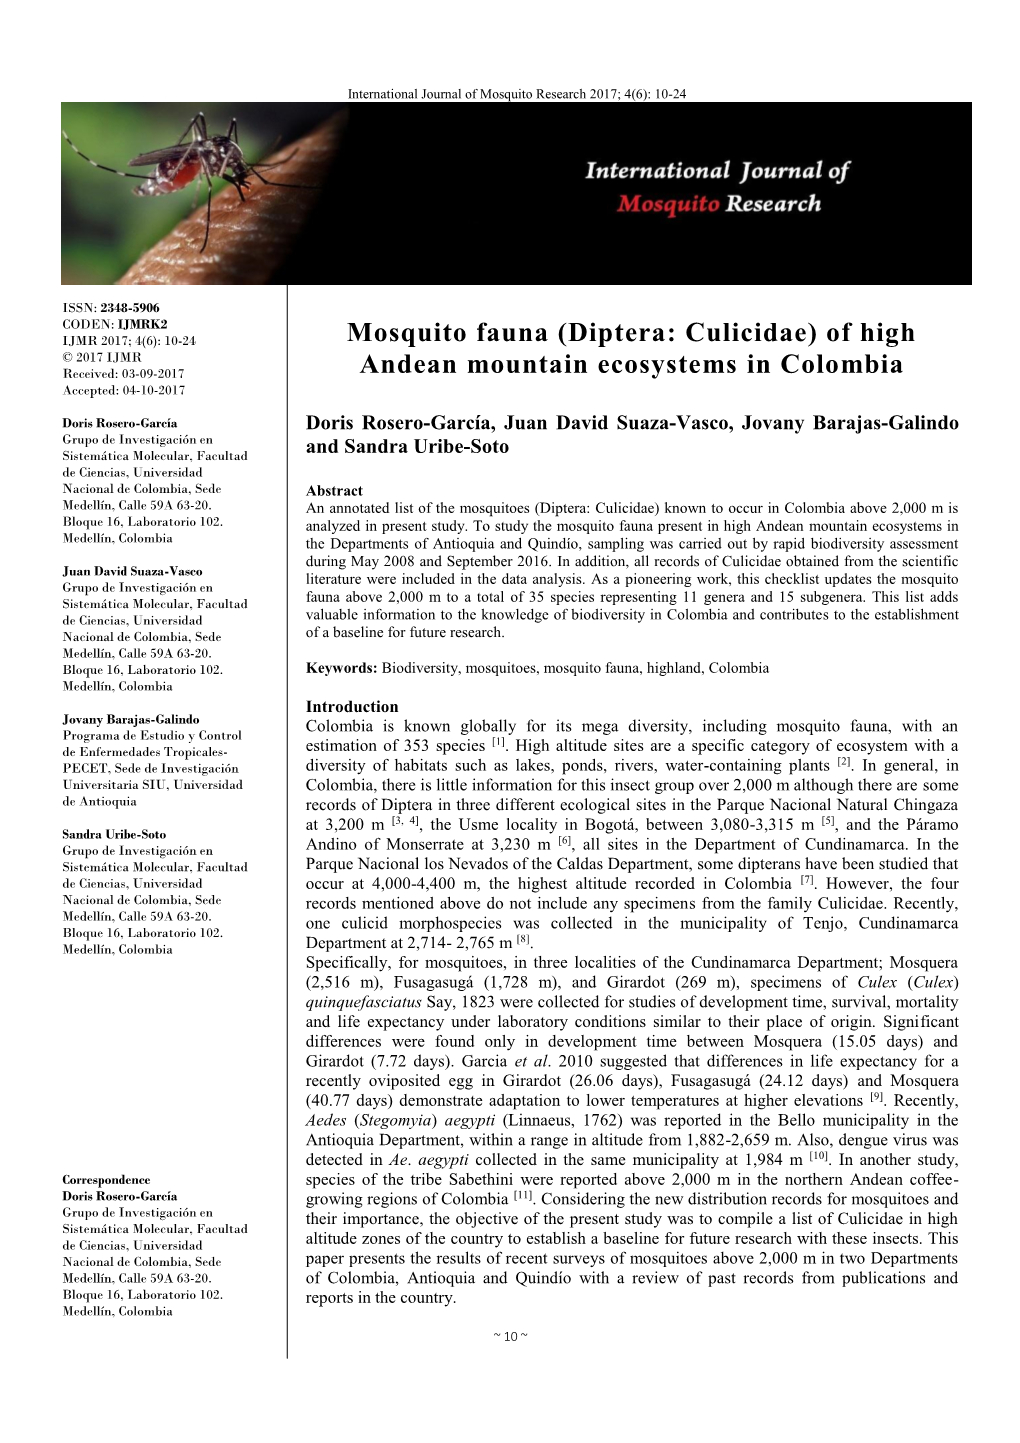 (Diptera: Culicidae) of High Andean Mountain Ecosystems in Colombia